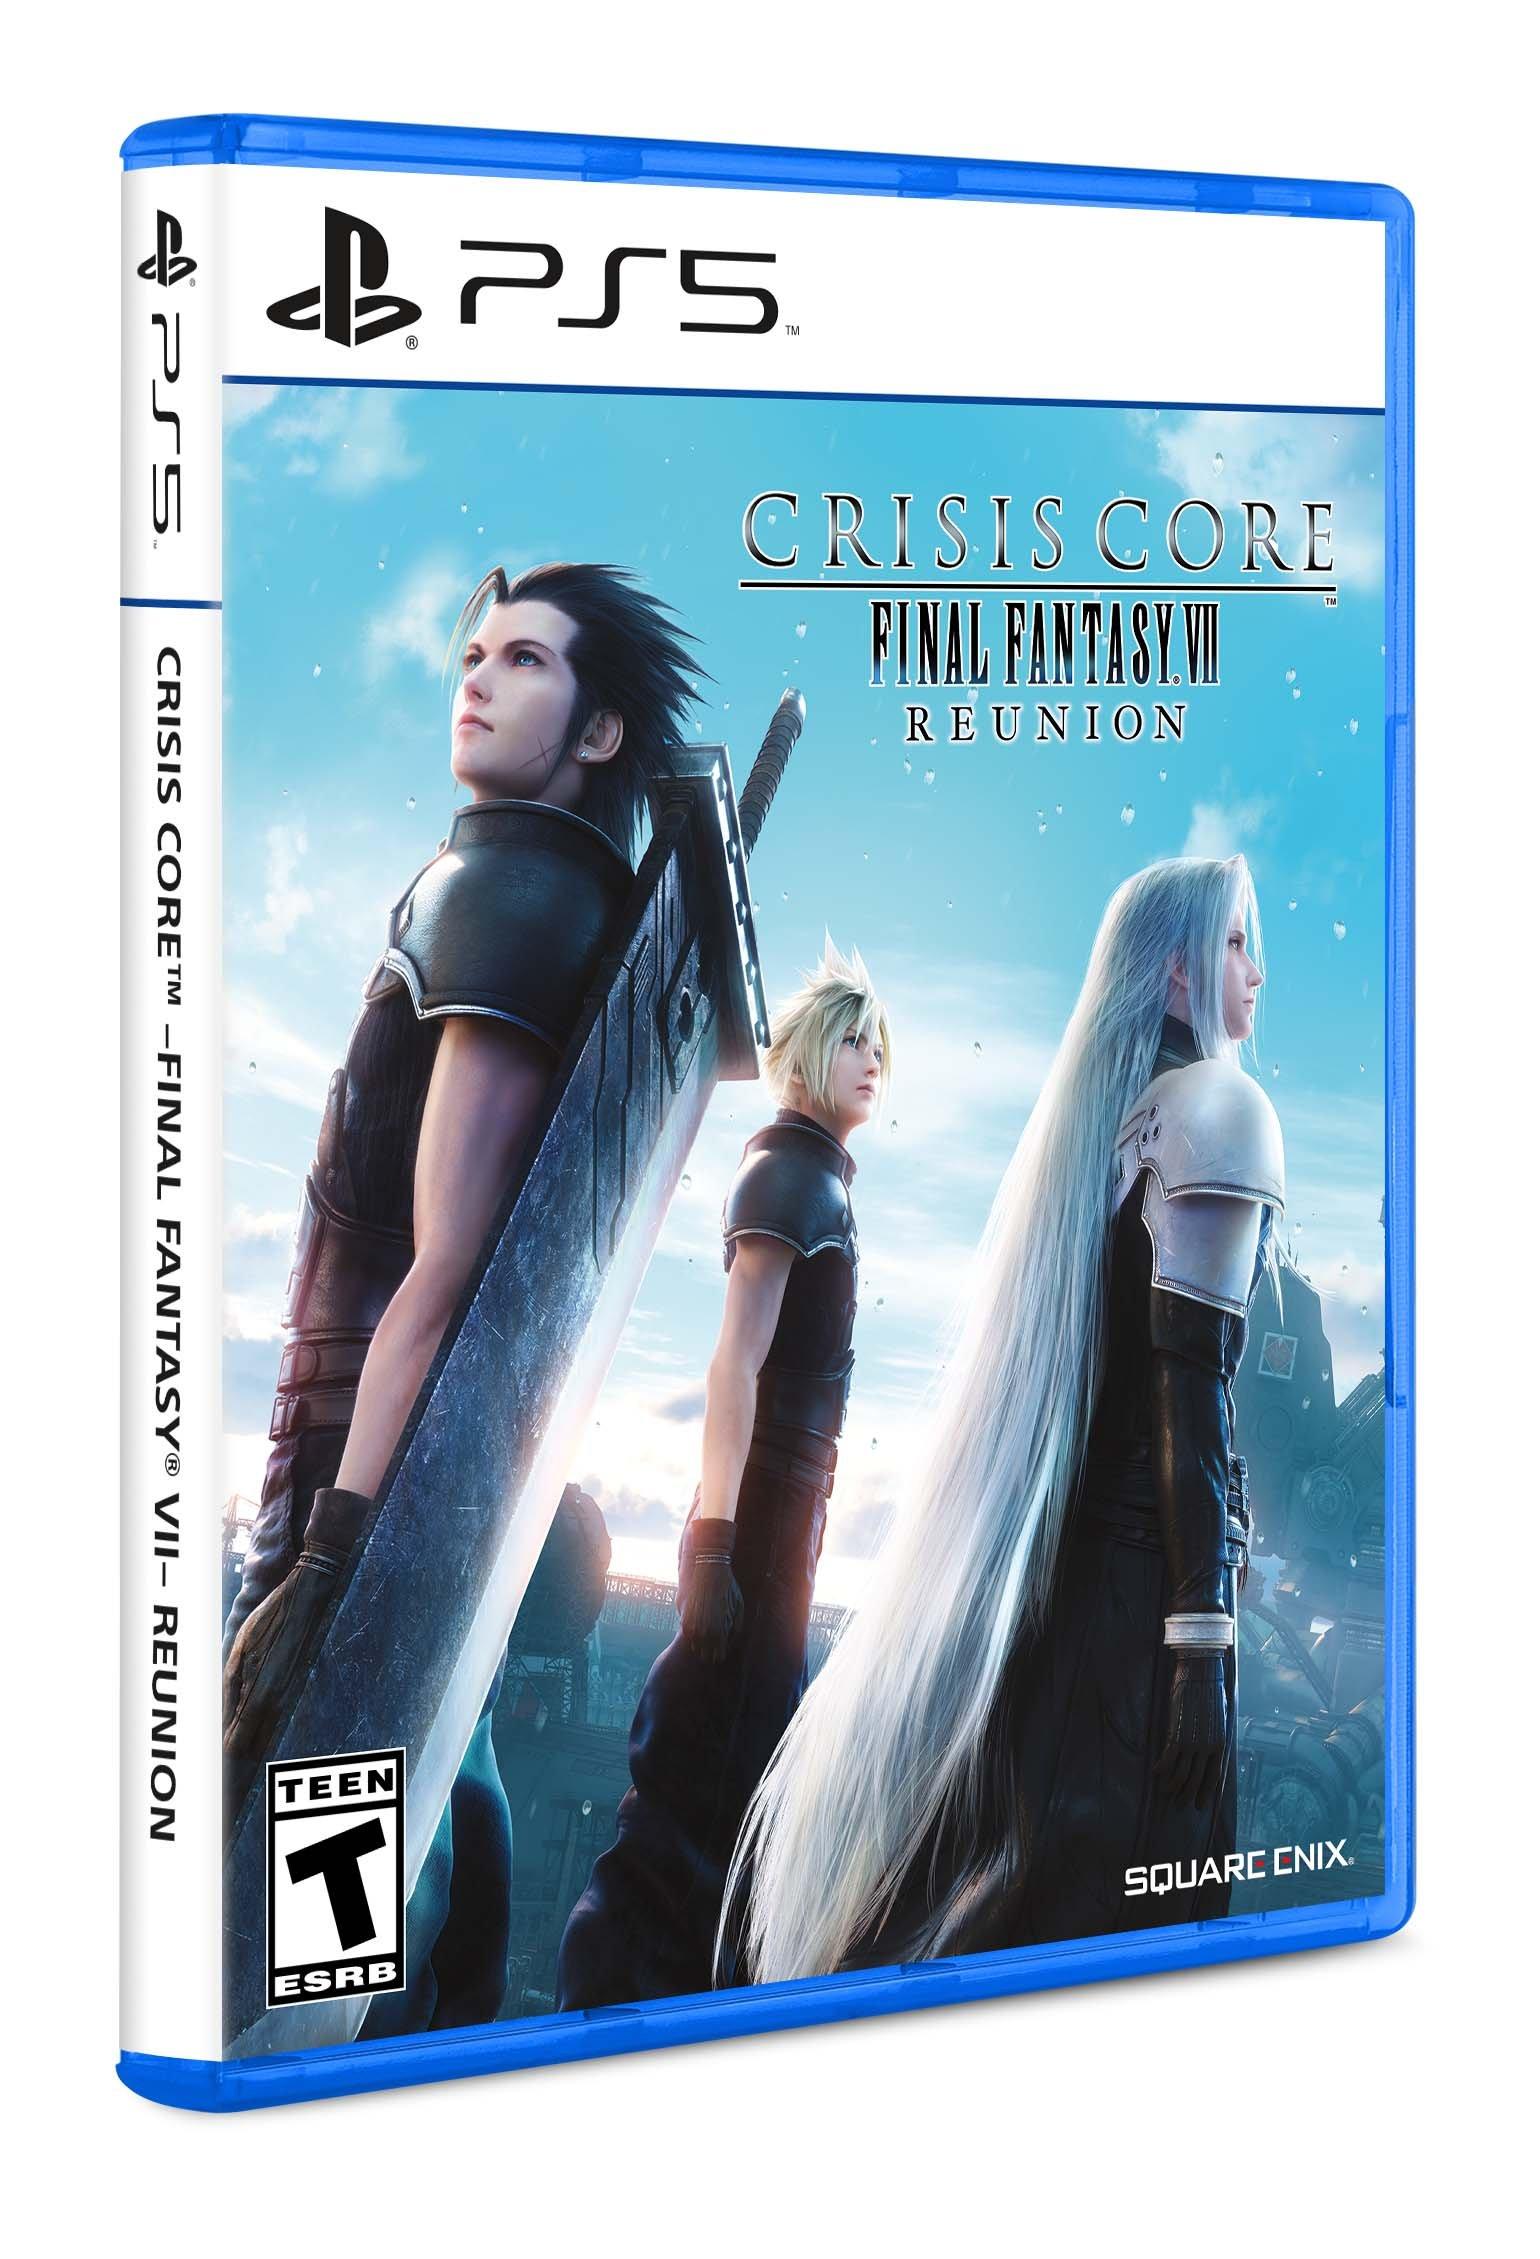 Crisis Core Final Fantasy 7 file size on PS5 is much smaller than PS4